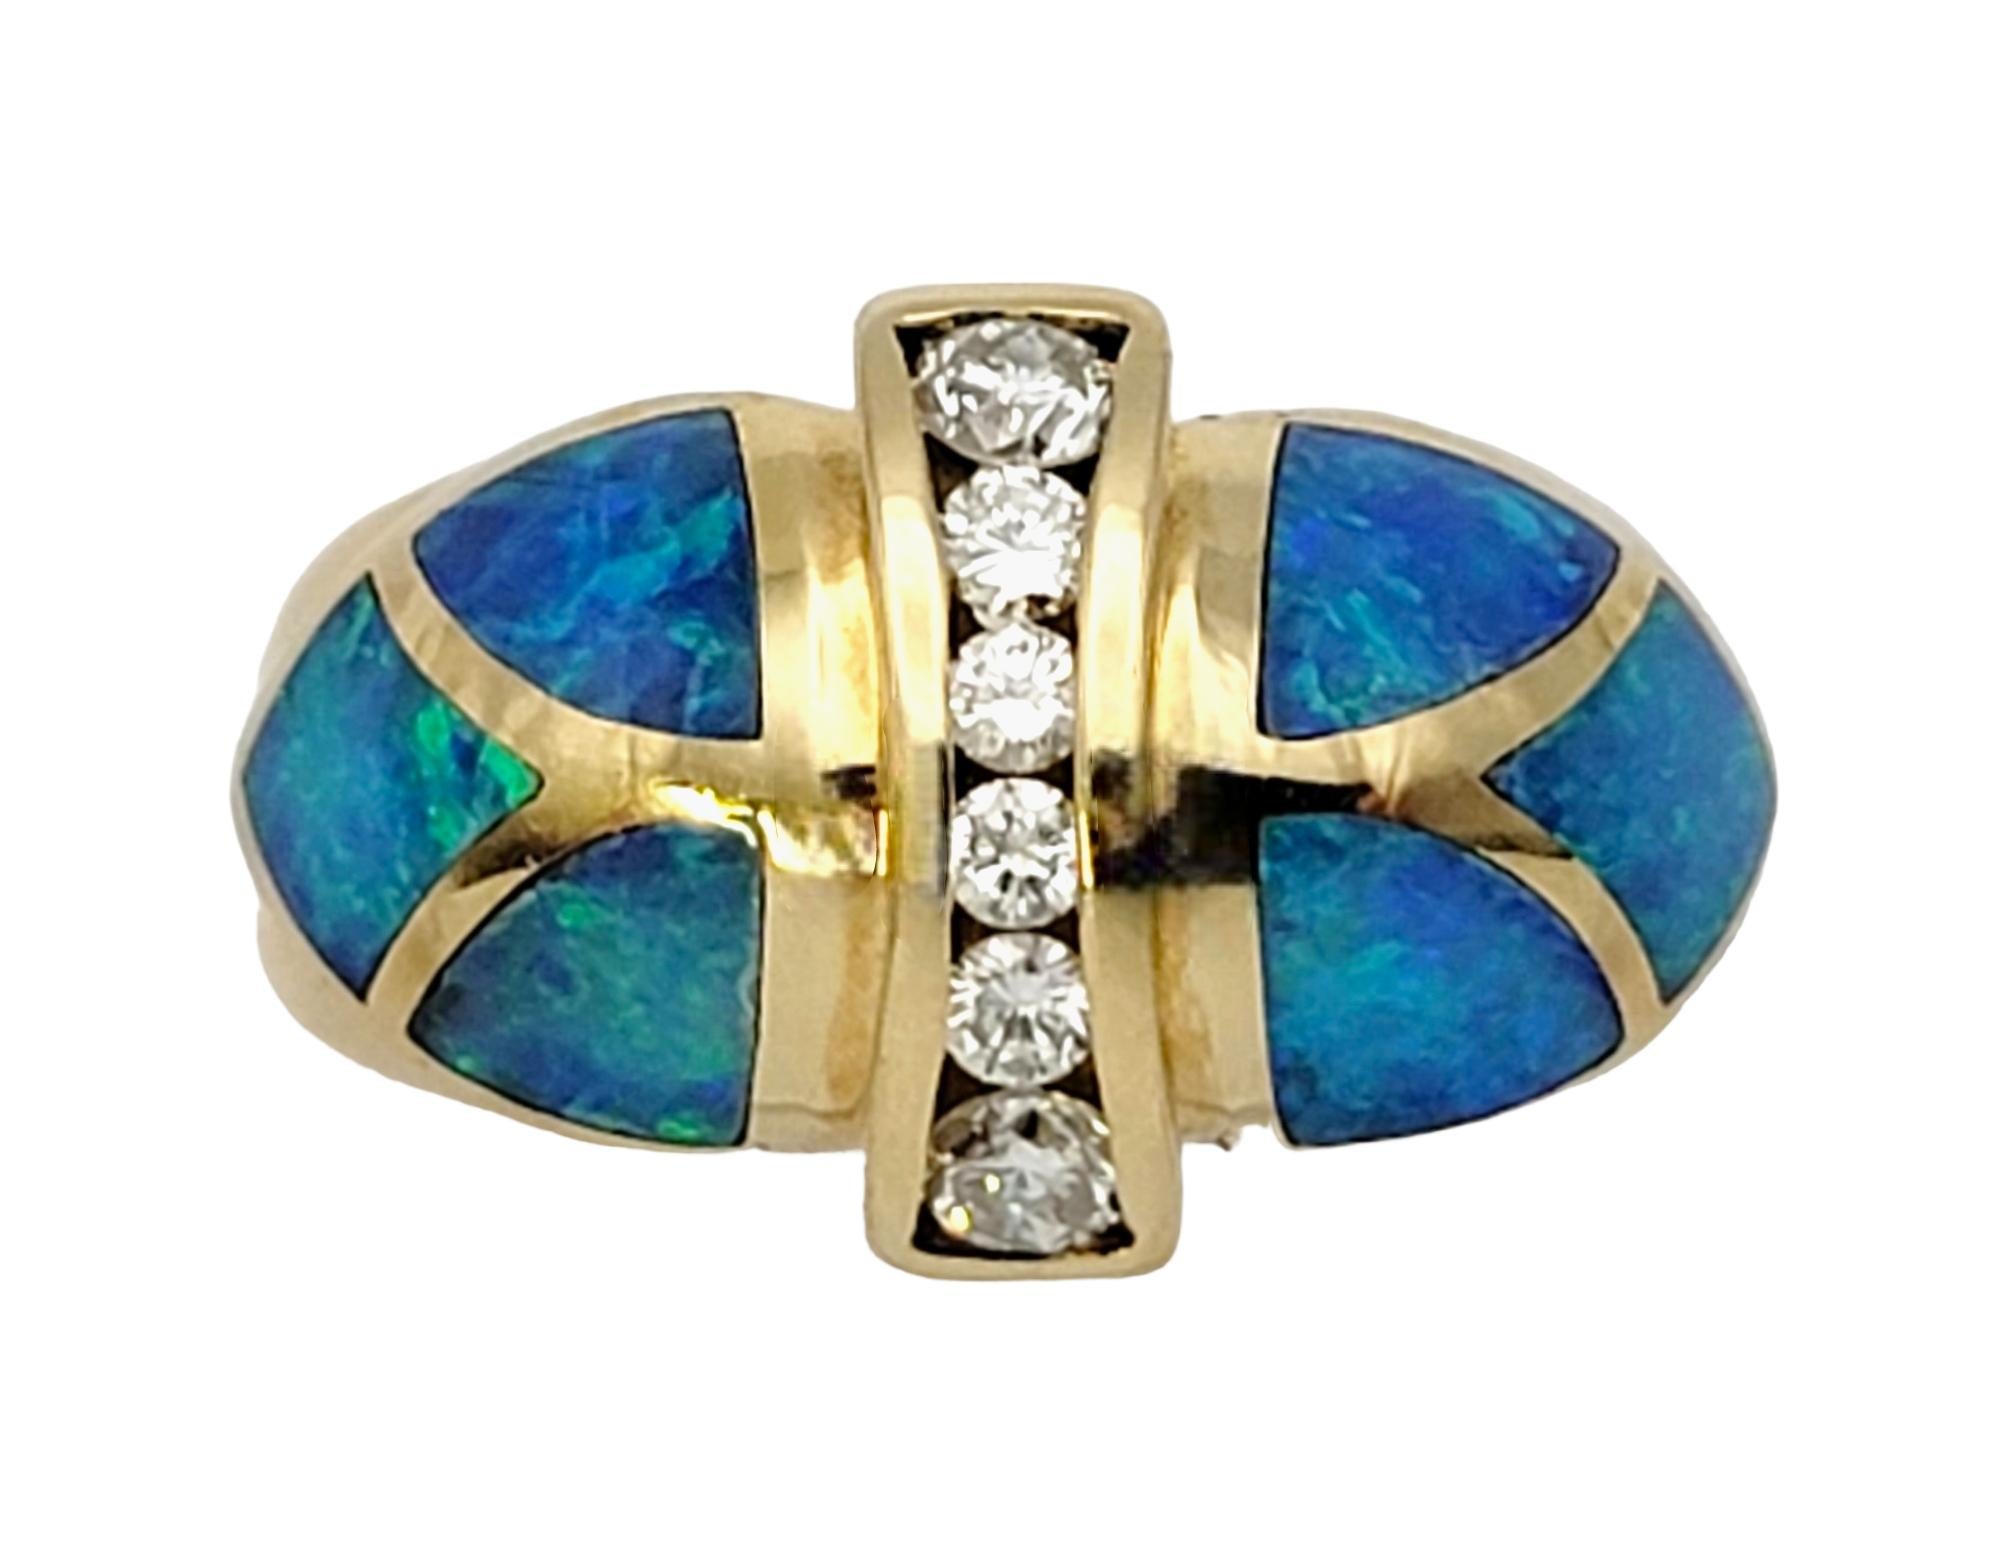 Ring size: 7.25

Featured here is a truly special piece to add to your beloved jewelry collection. This unique domed band ring is sure to impress with its lustrous color, shimmering sparkle and contemporary design.

This beautiful ring features a